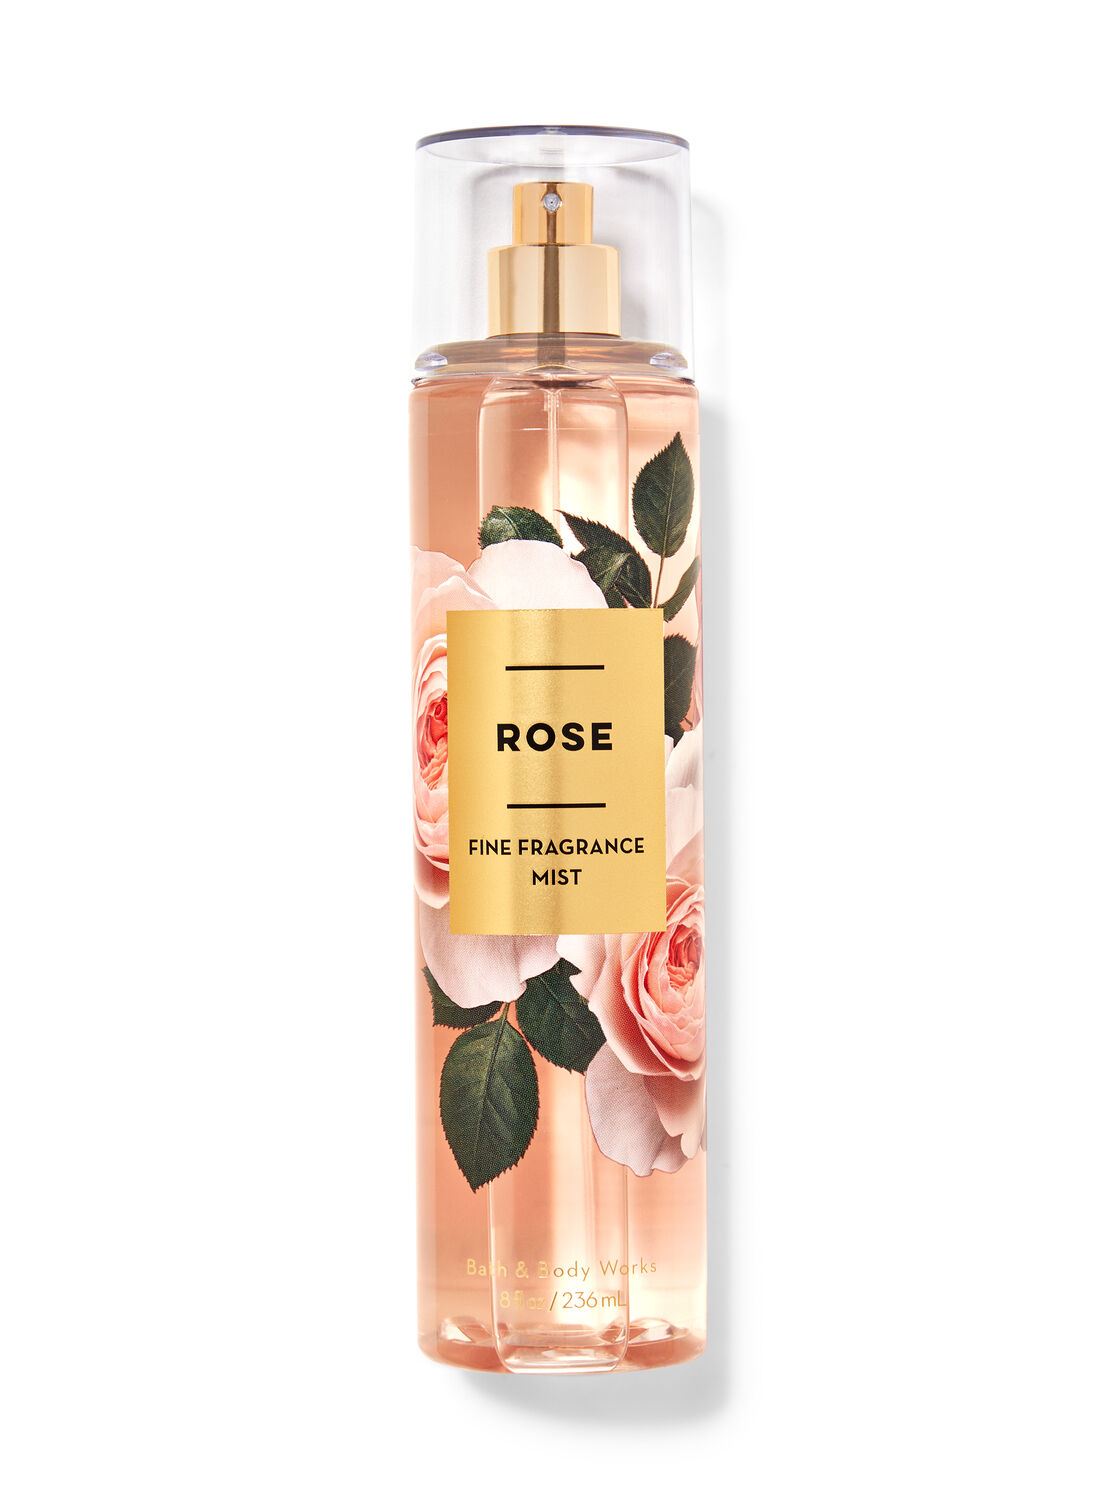 Fragrance Mist Review: SWEET PEA by BATH & BODY WORKS – Nosegasm